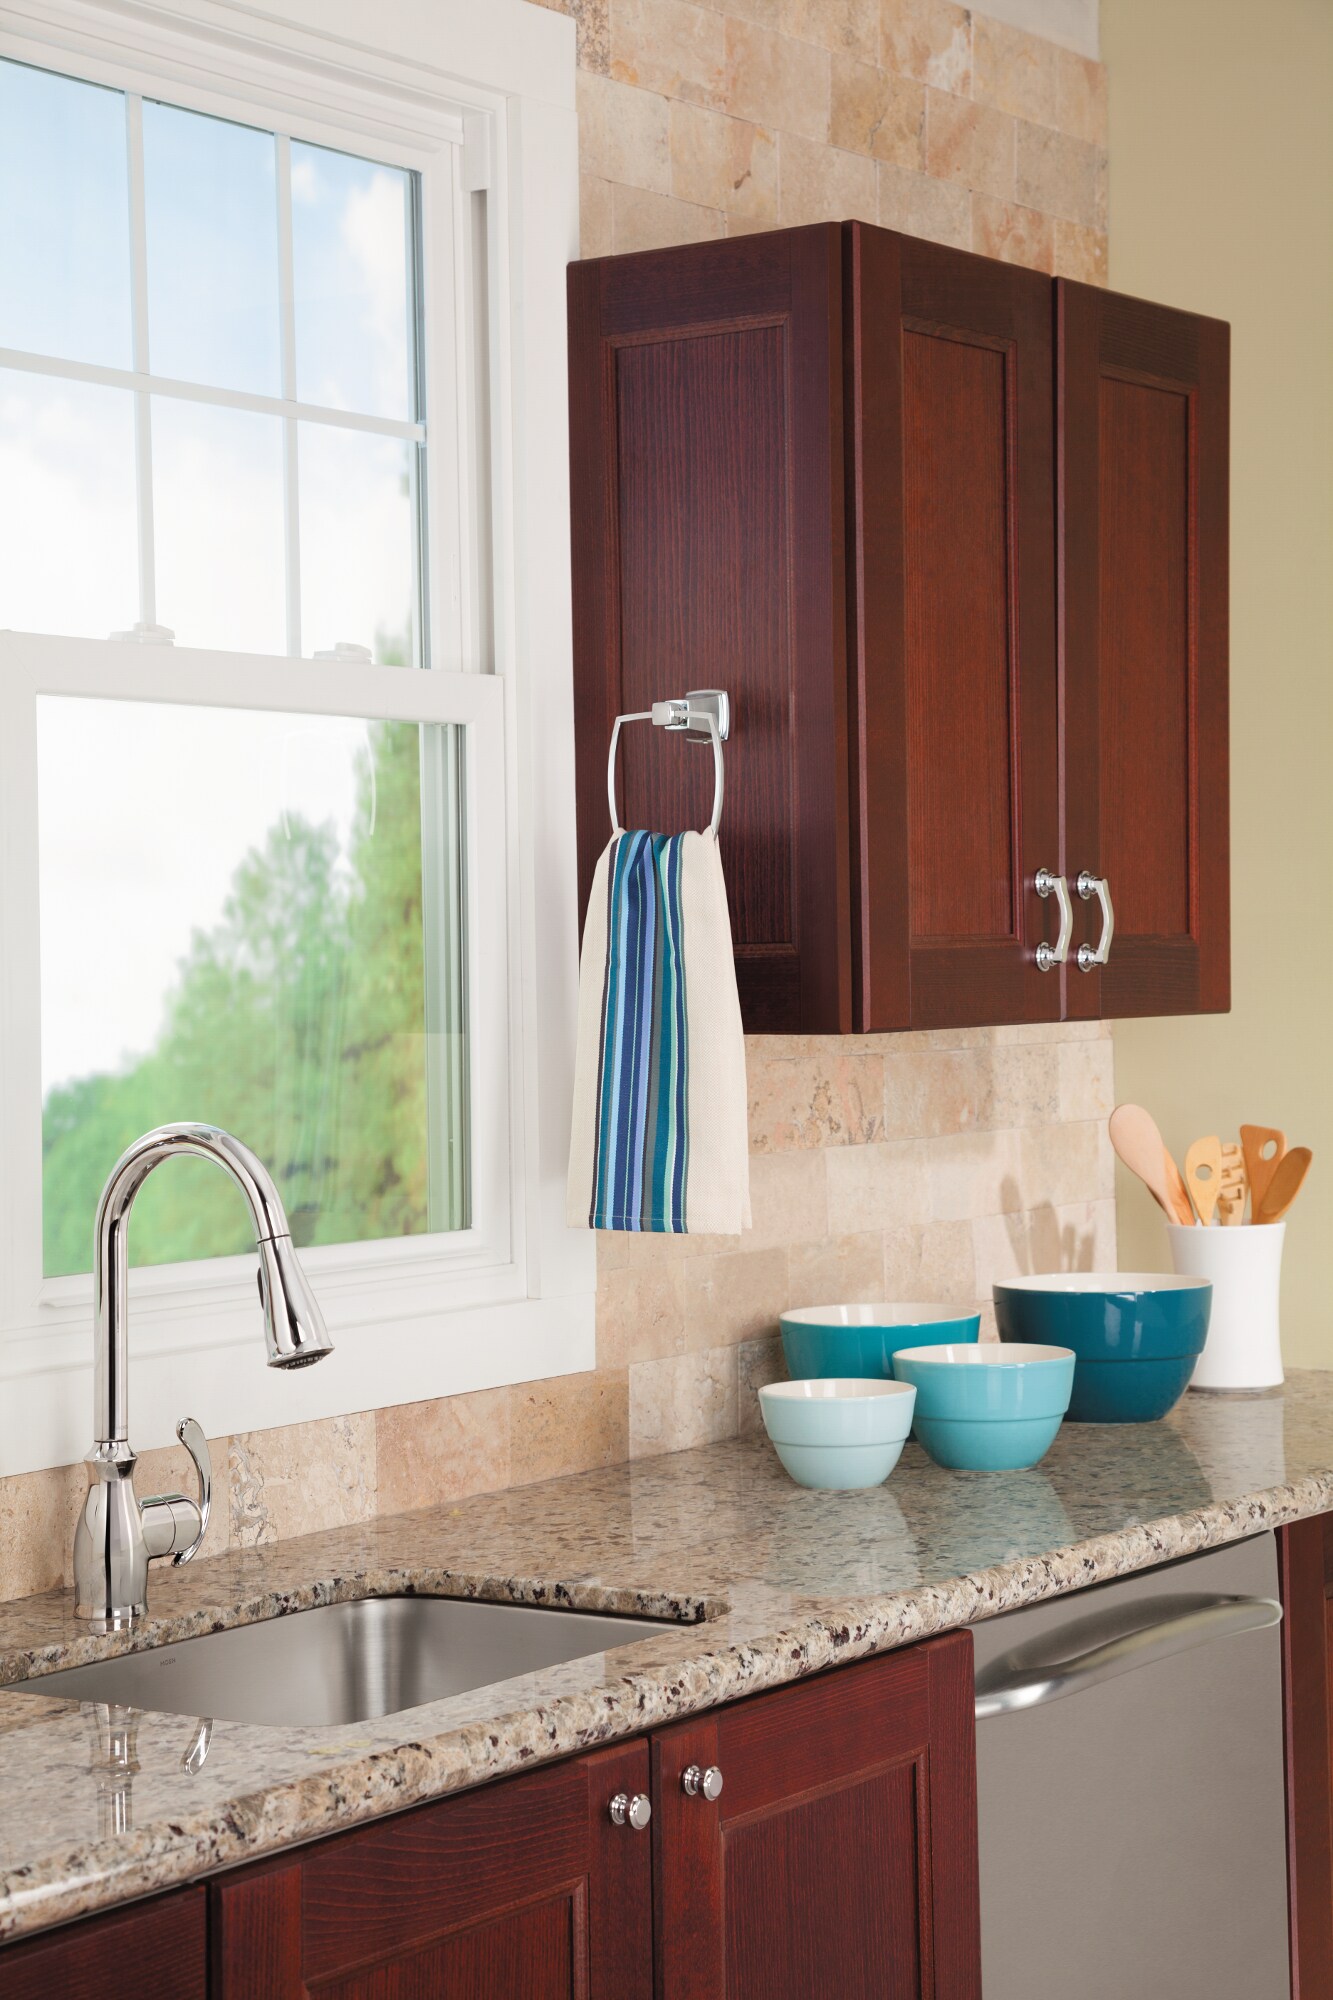 Moen Kipton Chrome Single Handle Pull-down Kitchen Faucet with Sprayer Function (Deck Plate Included)